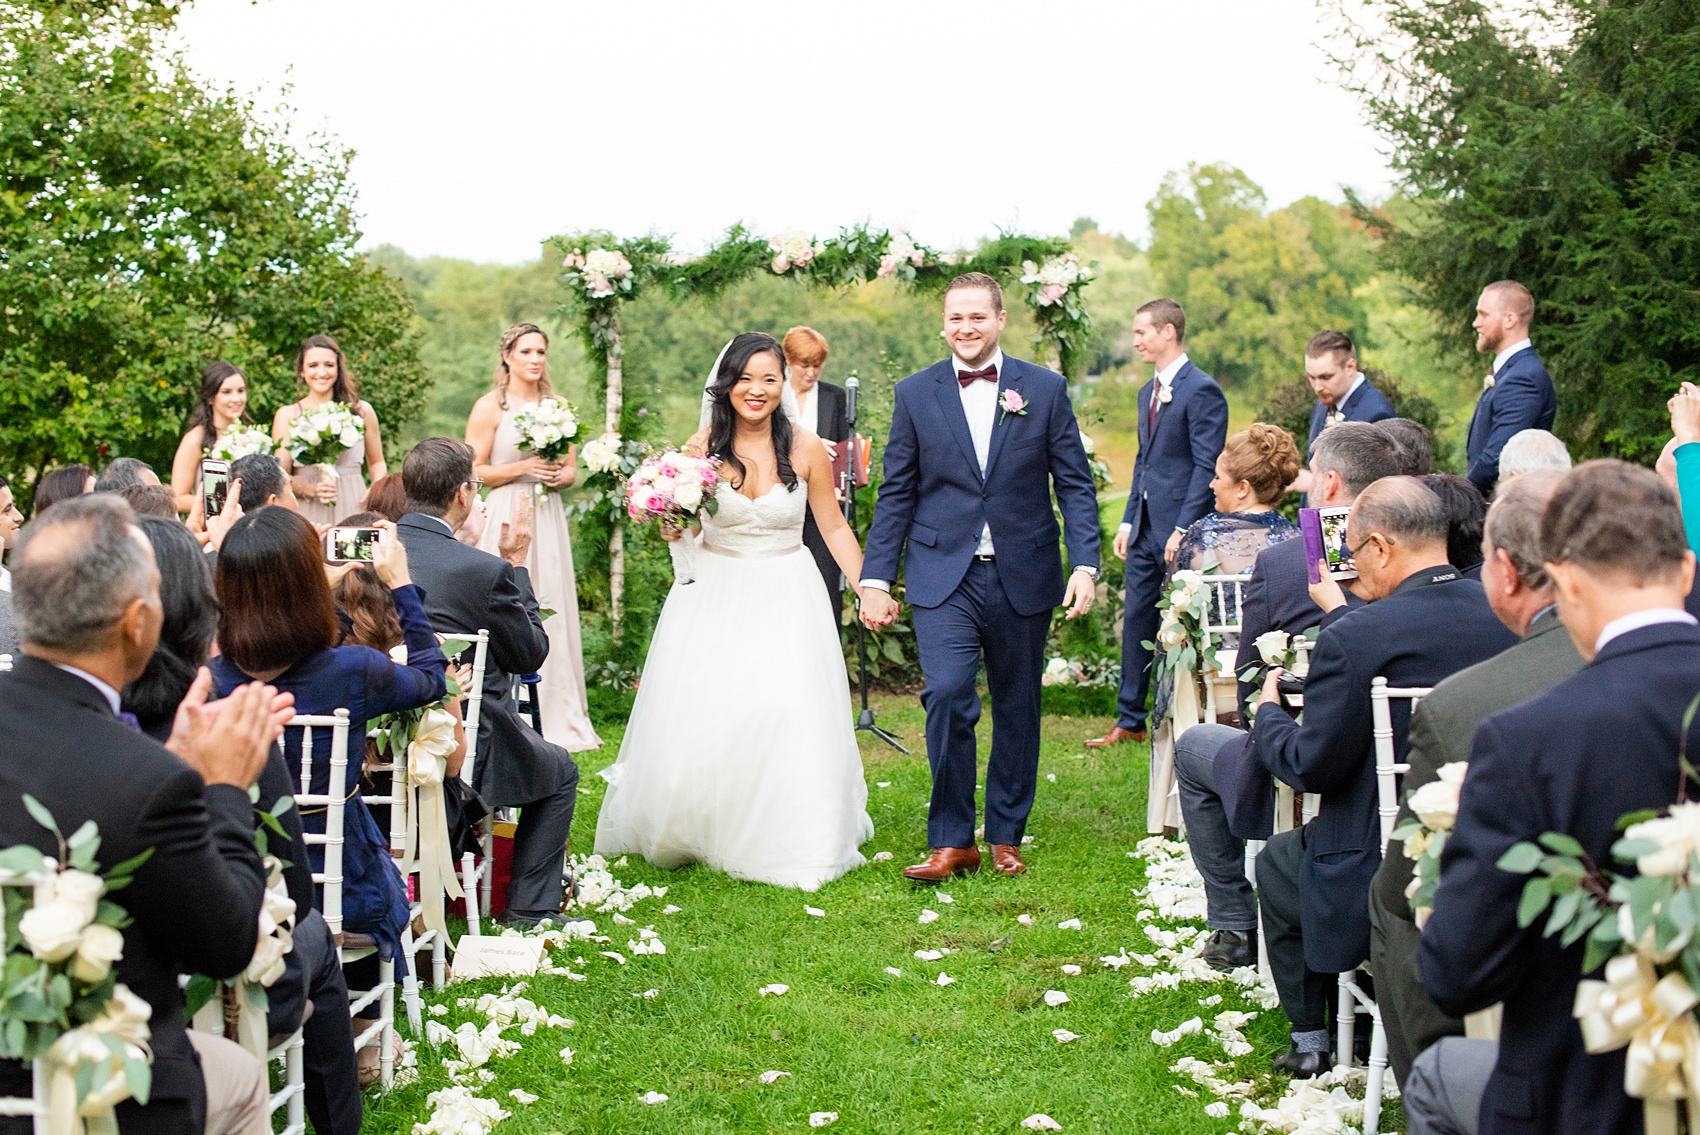 Wedding photos at Crabtree's Kittle House in Chappaqua, New York by Mikkel Paige Photography. This venue in Westchester county is a beautiful location for an outdoor September wedding. The couple’s ceremony overlooked an awesome fall landscape and custom chalkboard sign welcomed guests. Click through for more inspiration from their day! #mikkelpaige #CrabtreesKittleHouse #WestchesterWeddingVenues #WestchesterWedding #SeptemberWedding #weddingceremony #outdoorceremony